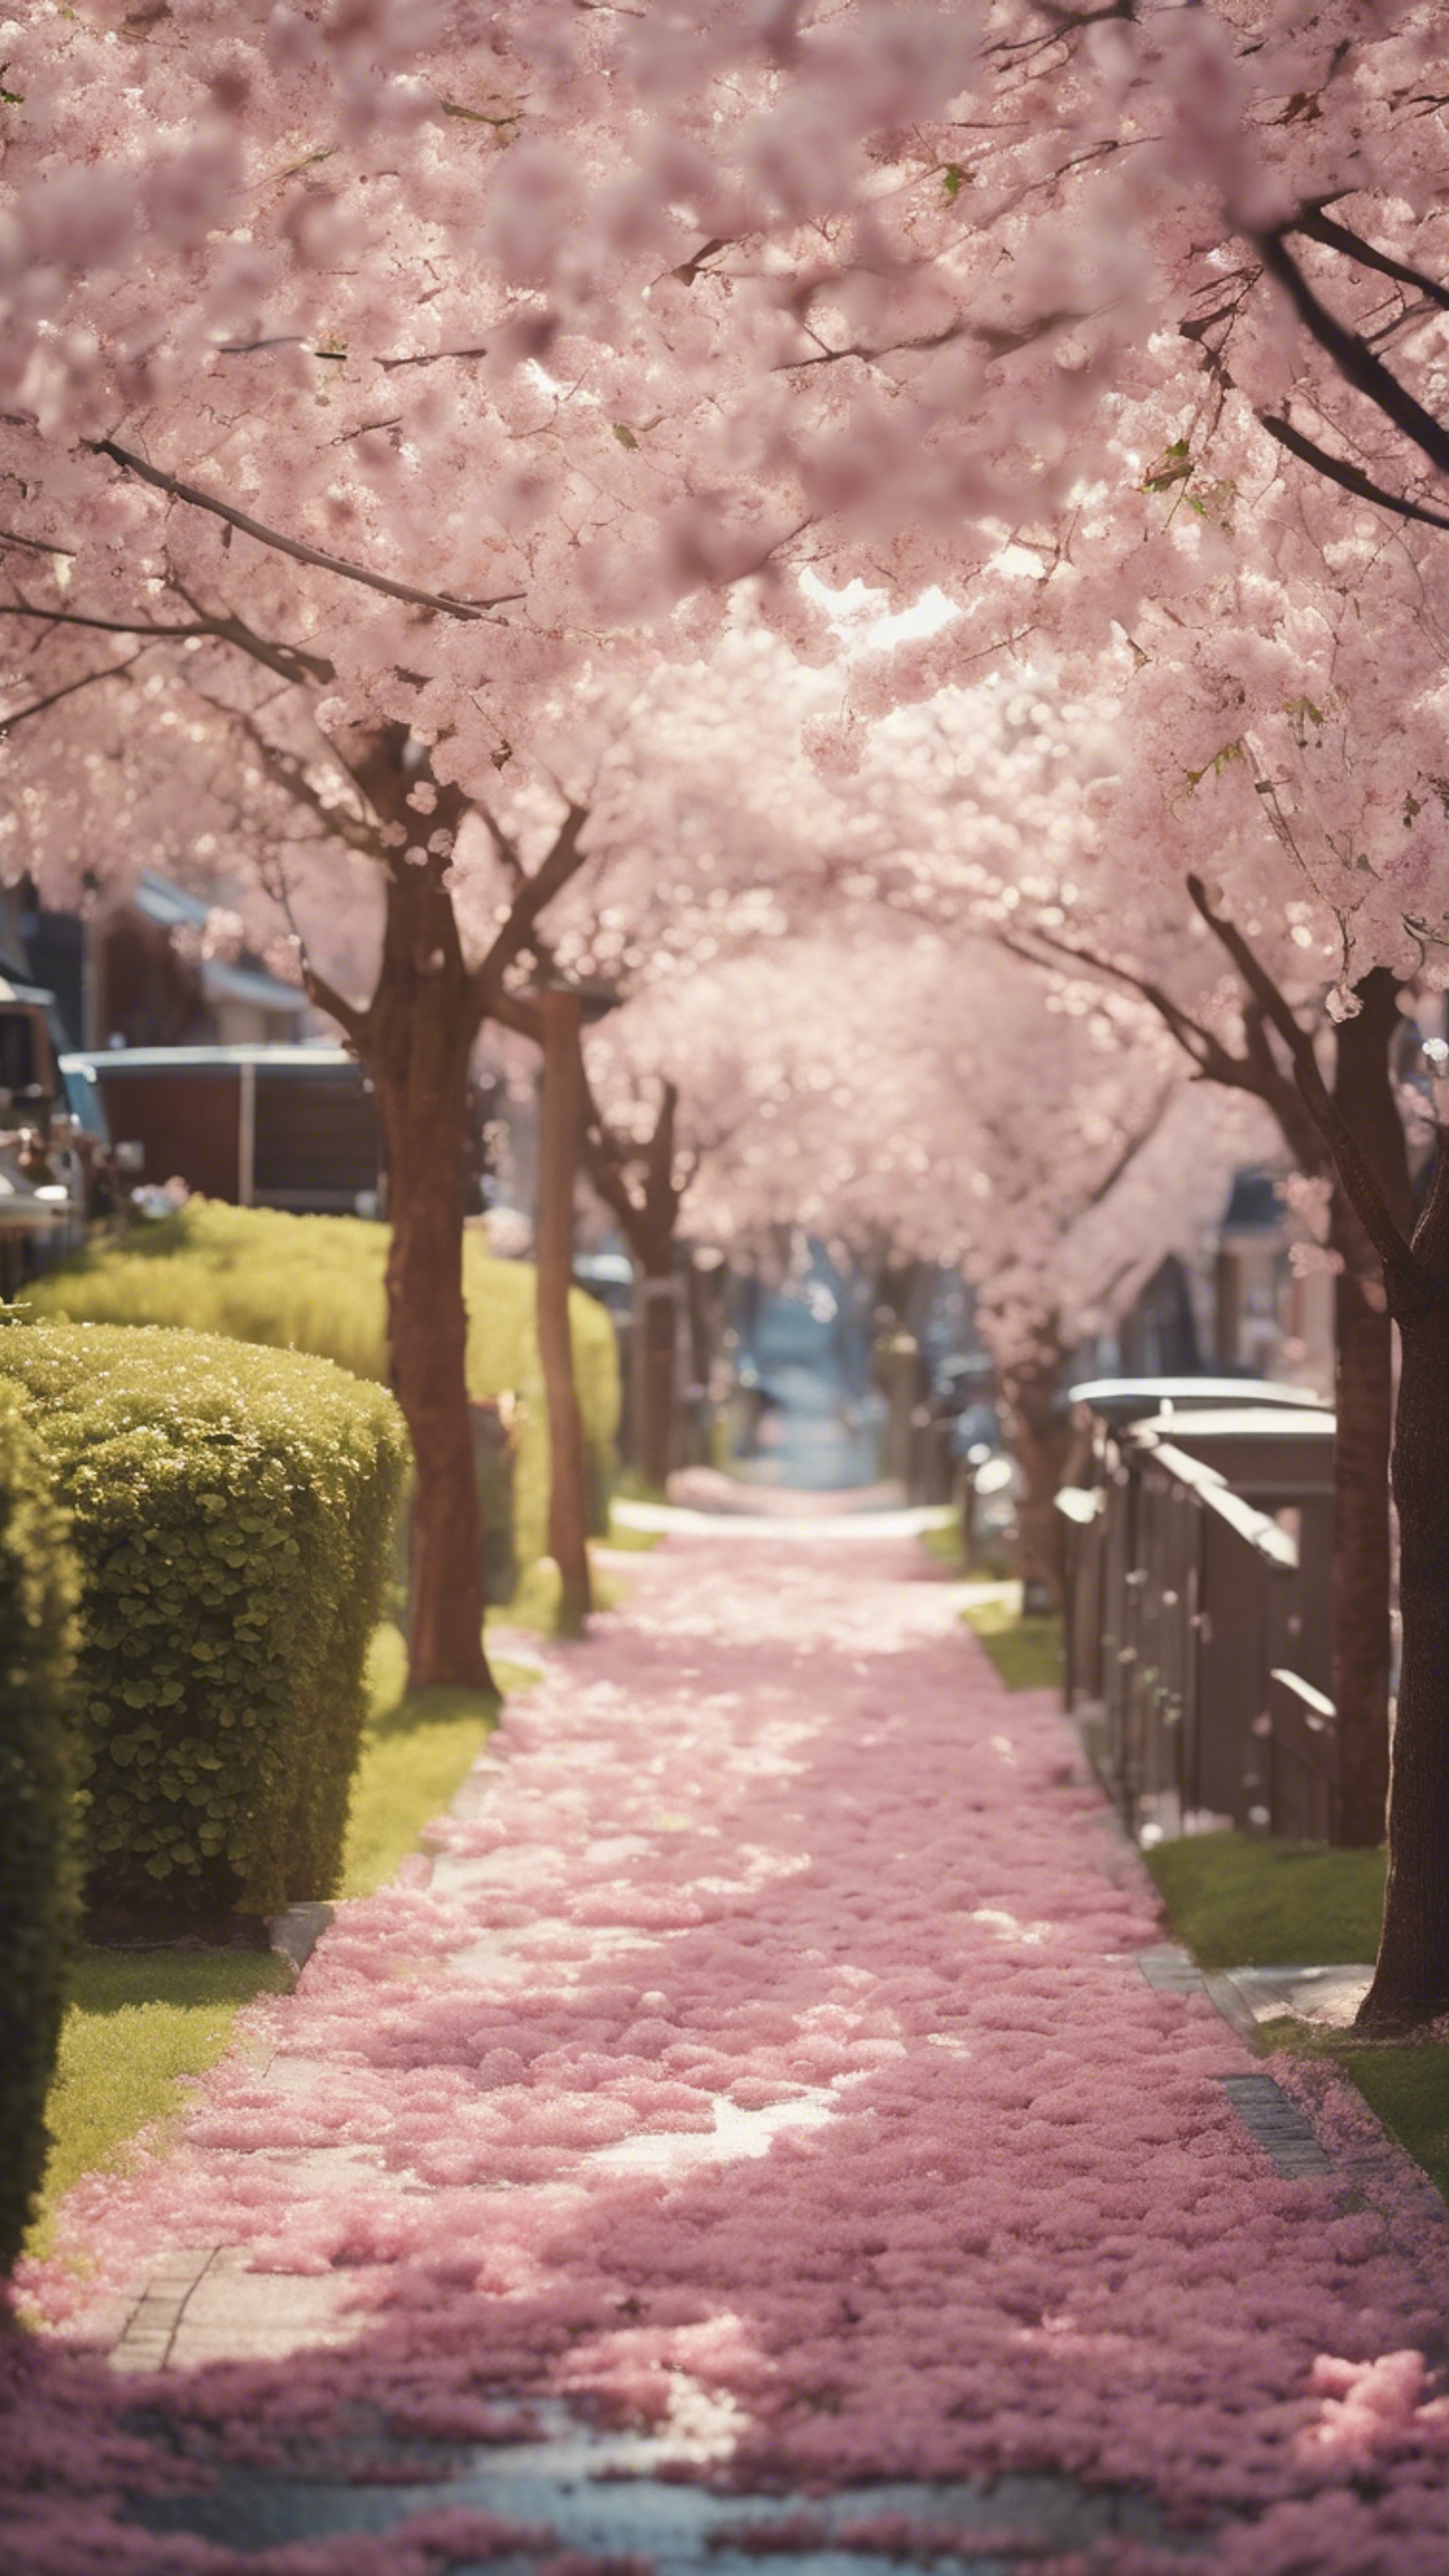 A suburban street lined with houses, and cherry blossom trees showering the pathway with petals, giving an ethereal feel to a sunny spring morning. Ταπετσαρία[d085be0bf6ea43718843]